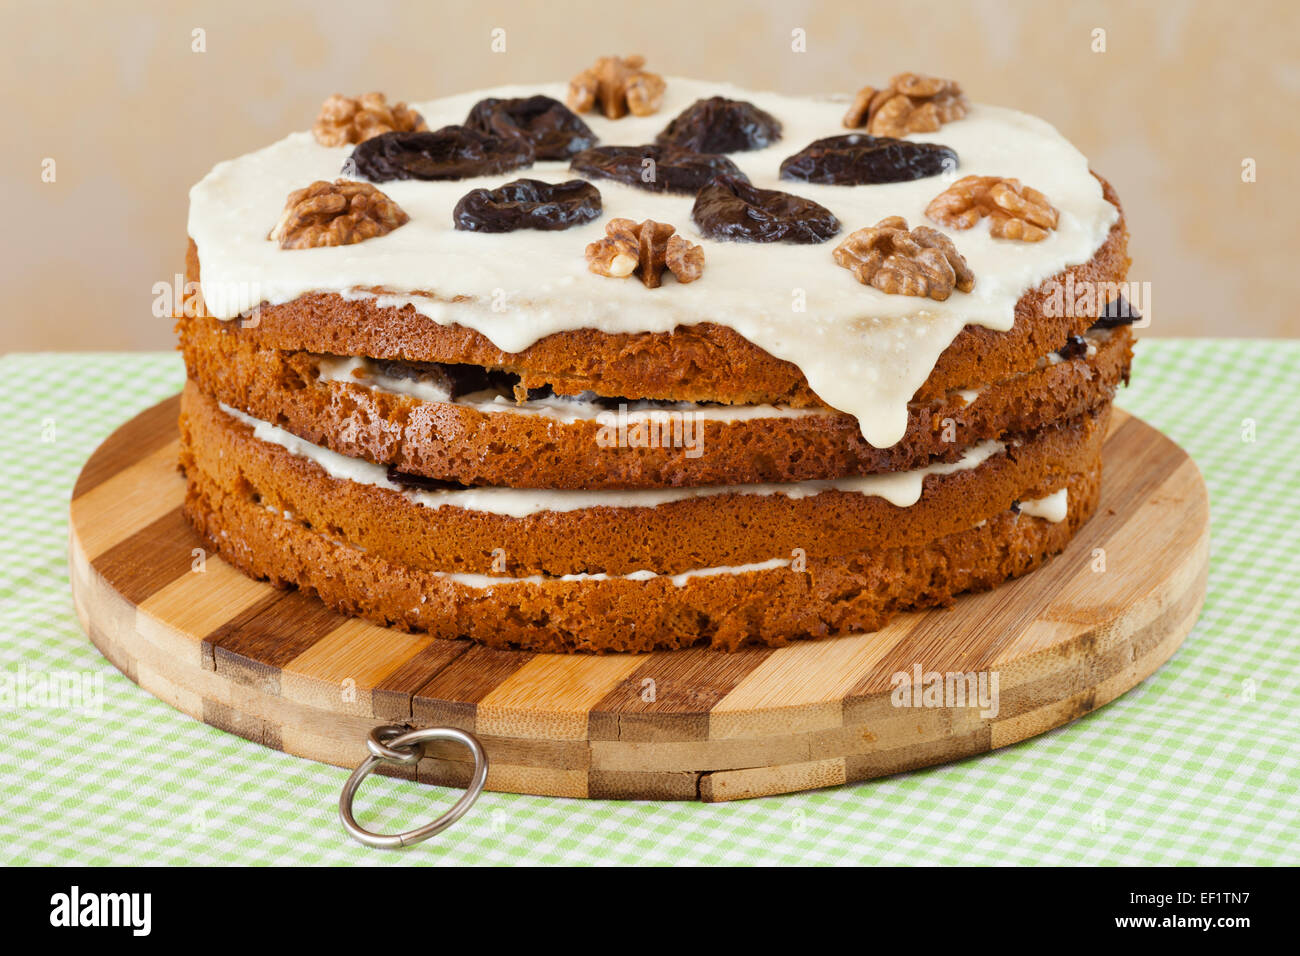 honey cake with plum and walnut on kitchen table Stock Photo